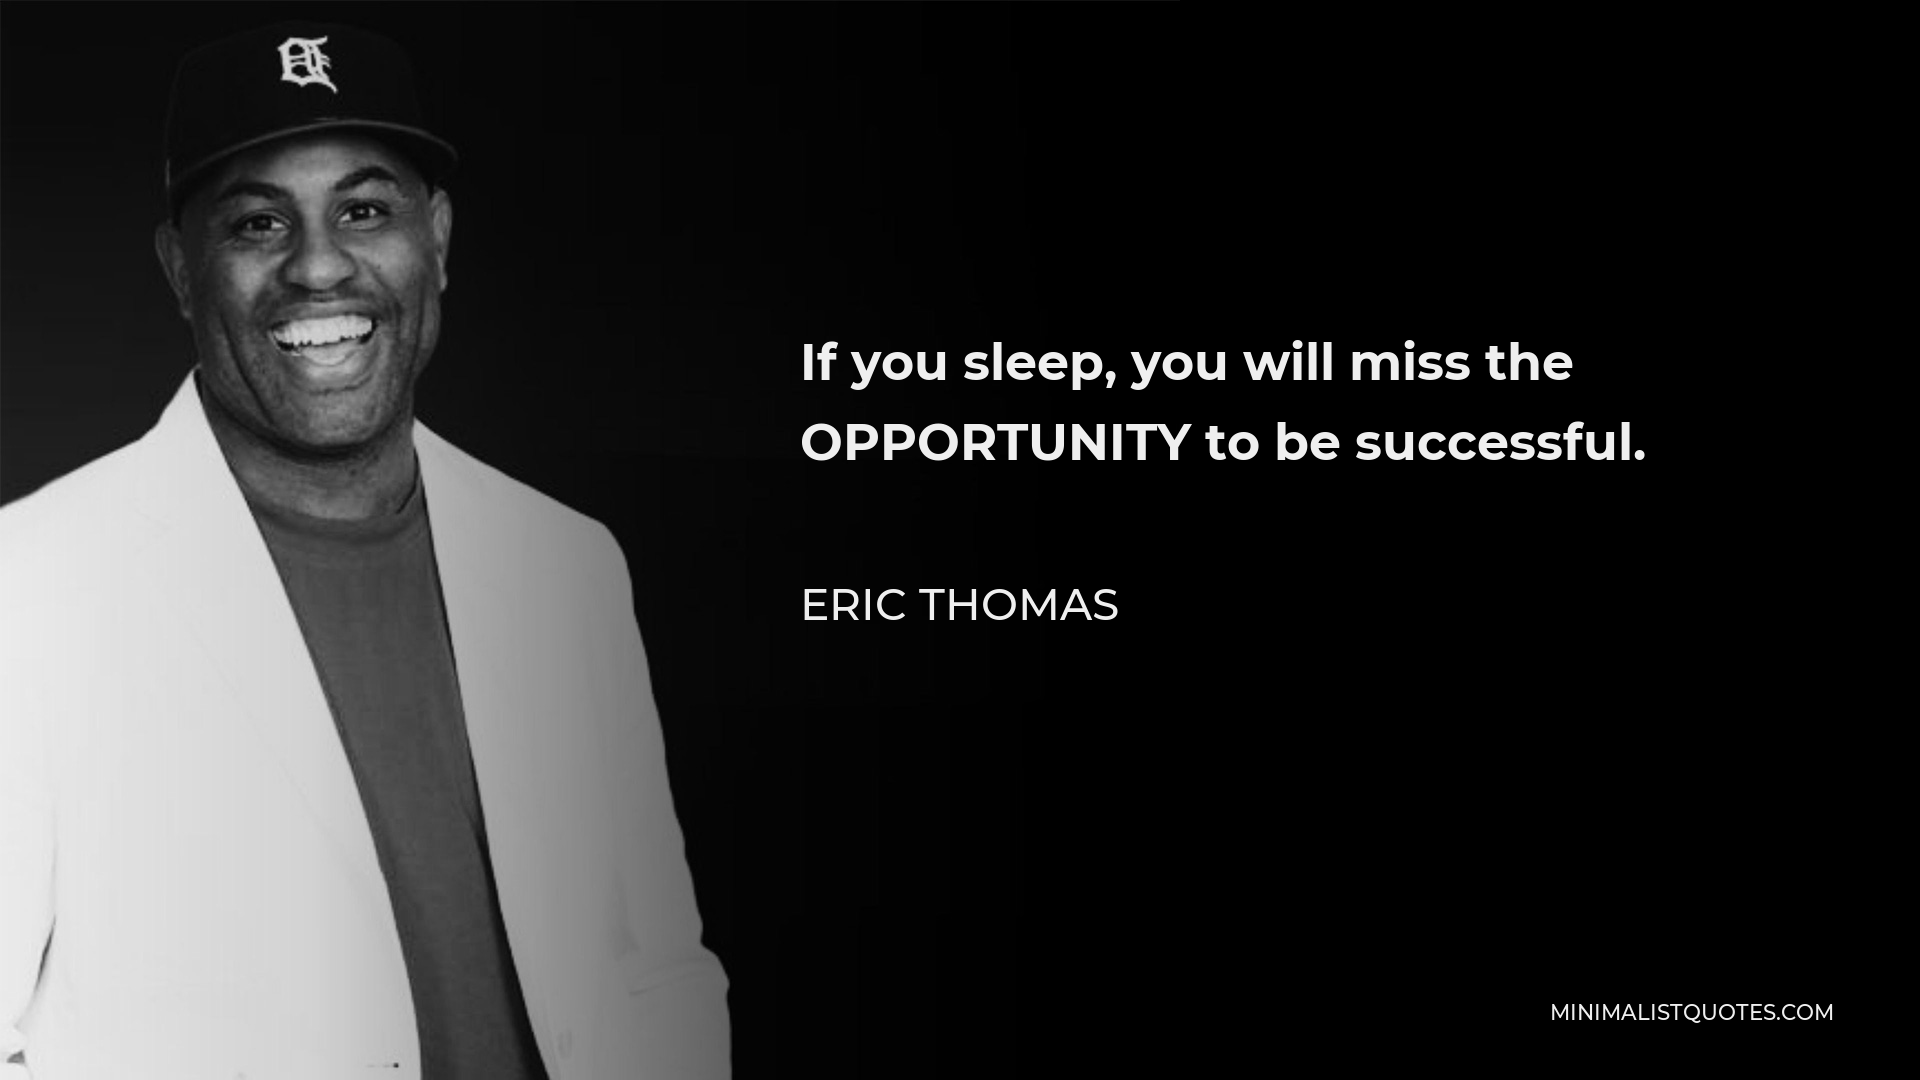 Eric Thomas Quote - If you sleep, you will miss the OPPORTUNITY to be successful.